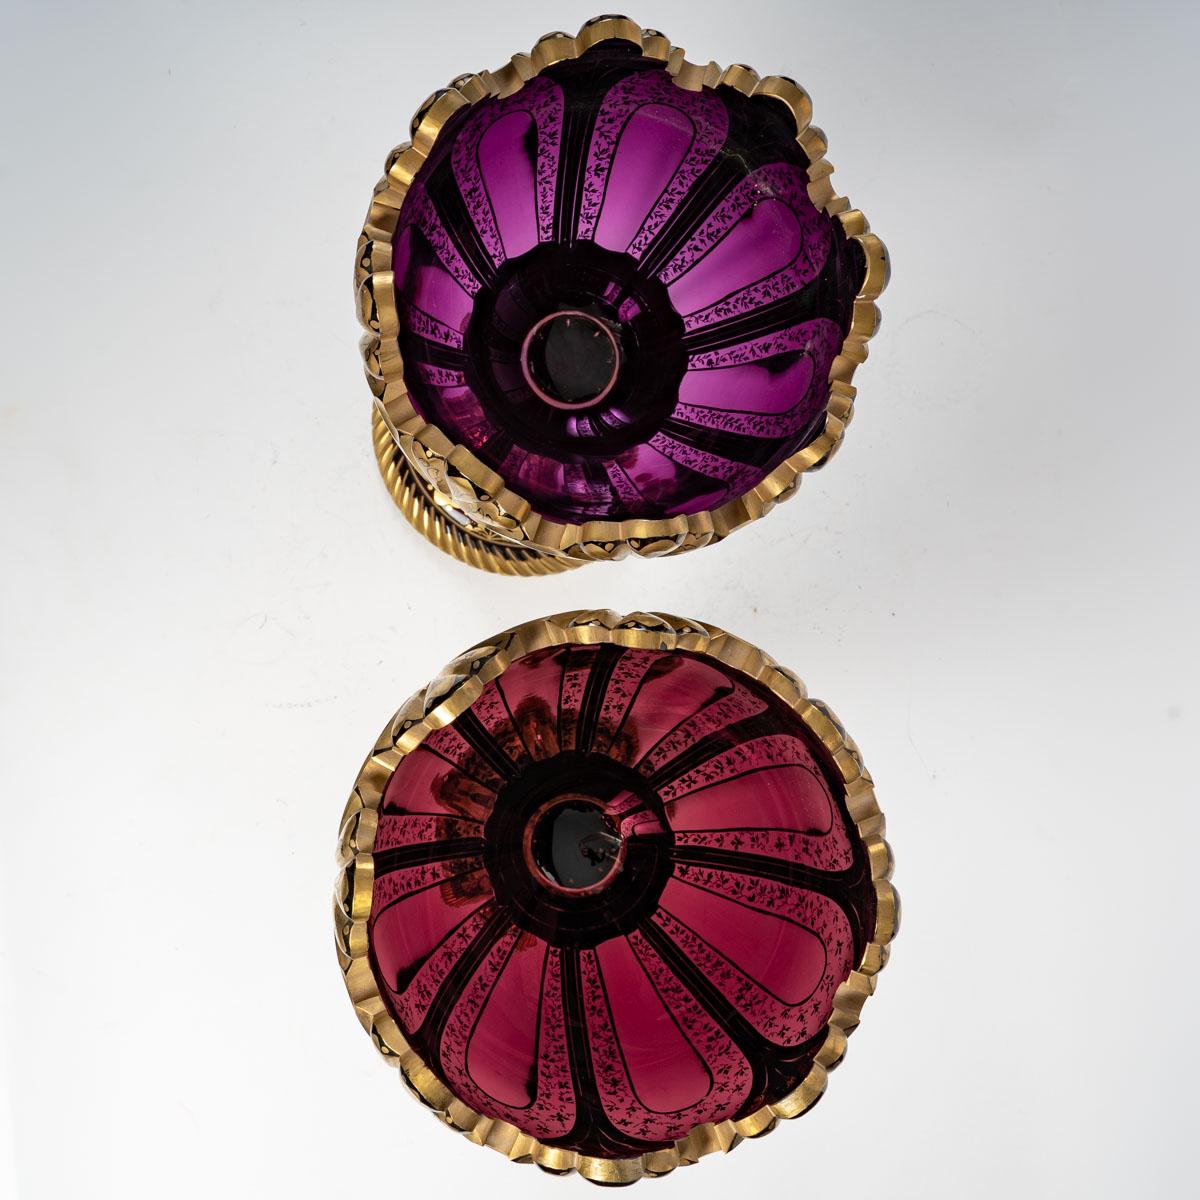 Important pair of Bohemian goblets, 19th century.
Important pair of Bohemian crystal gilt and violet cups of the 19th century, high quality of execution and decoration.
H: 46 cm, d: 24 cm
3049